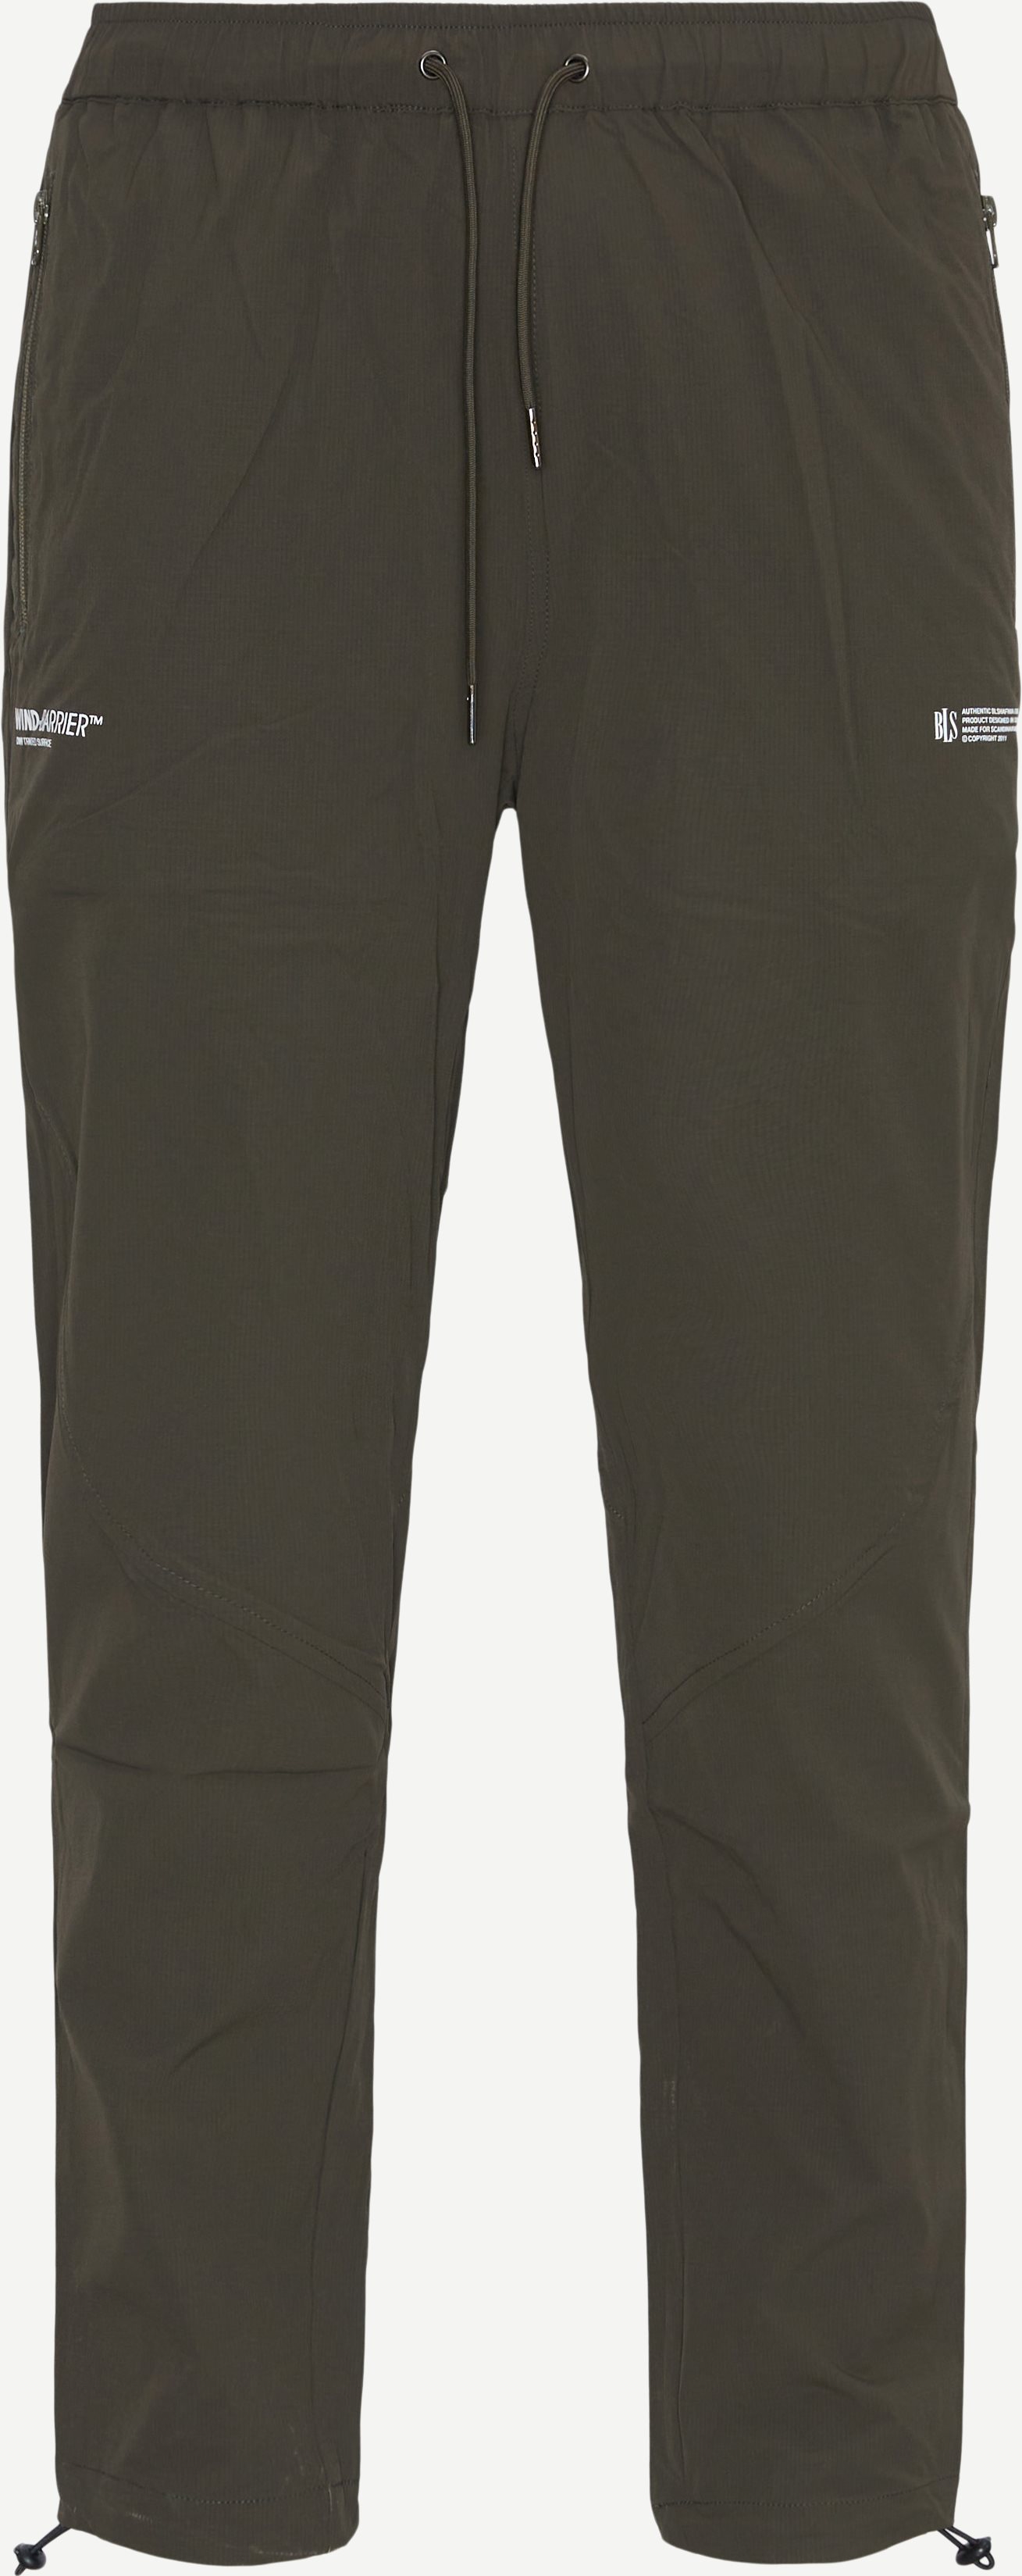 BLS Trousers TOMPKINS PANTS 202403066 Army